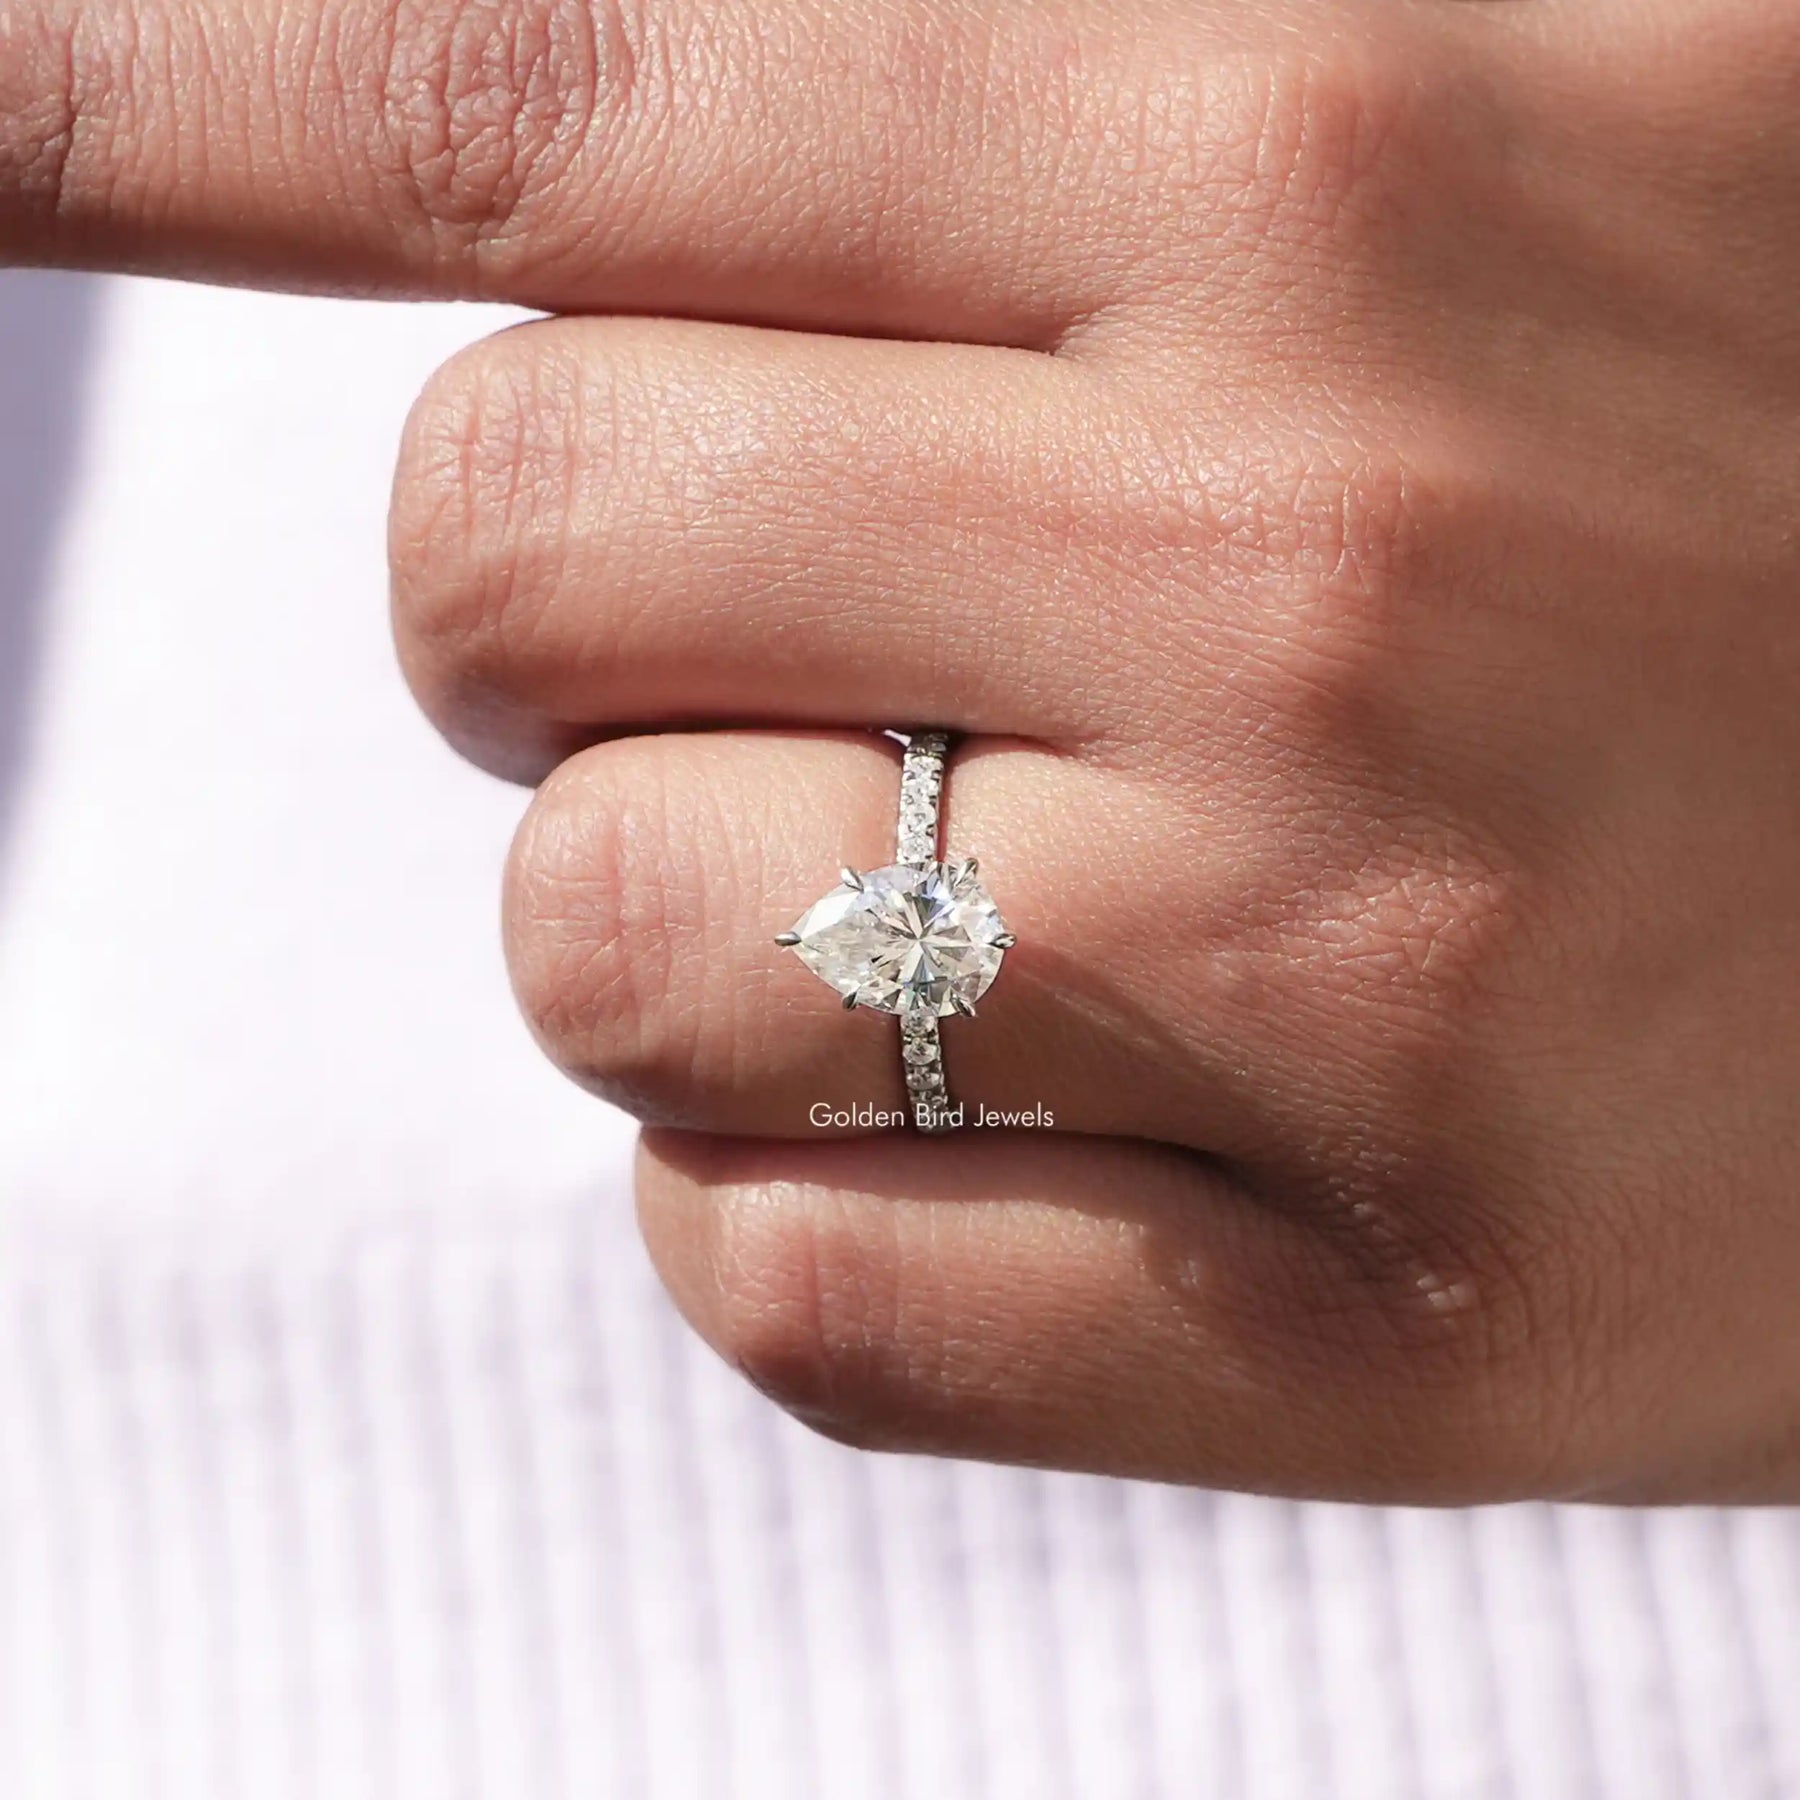 [In finger front view of 14k white gold pear shaped moissanite ring]-[Golden Bird Jewels]